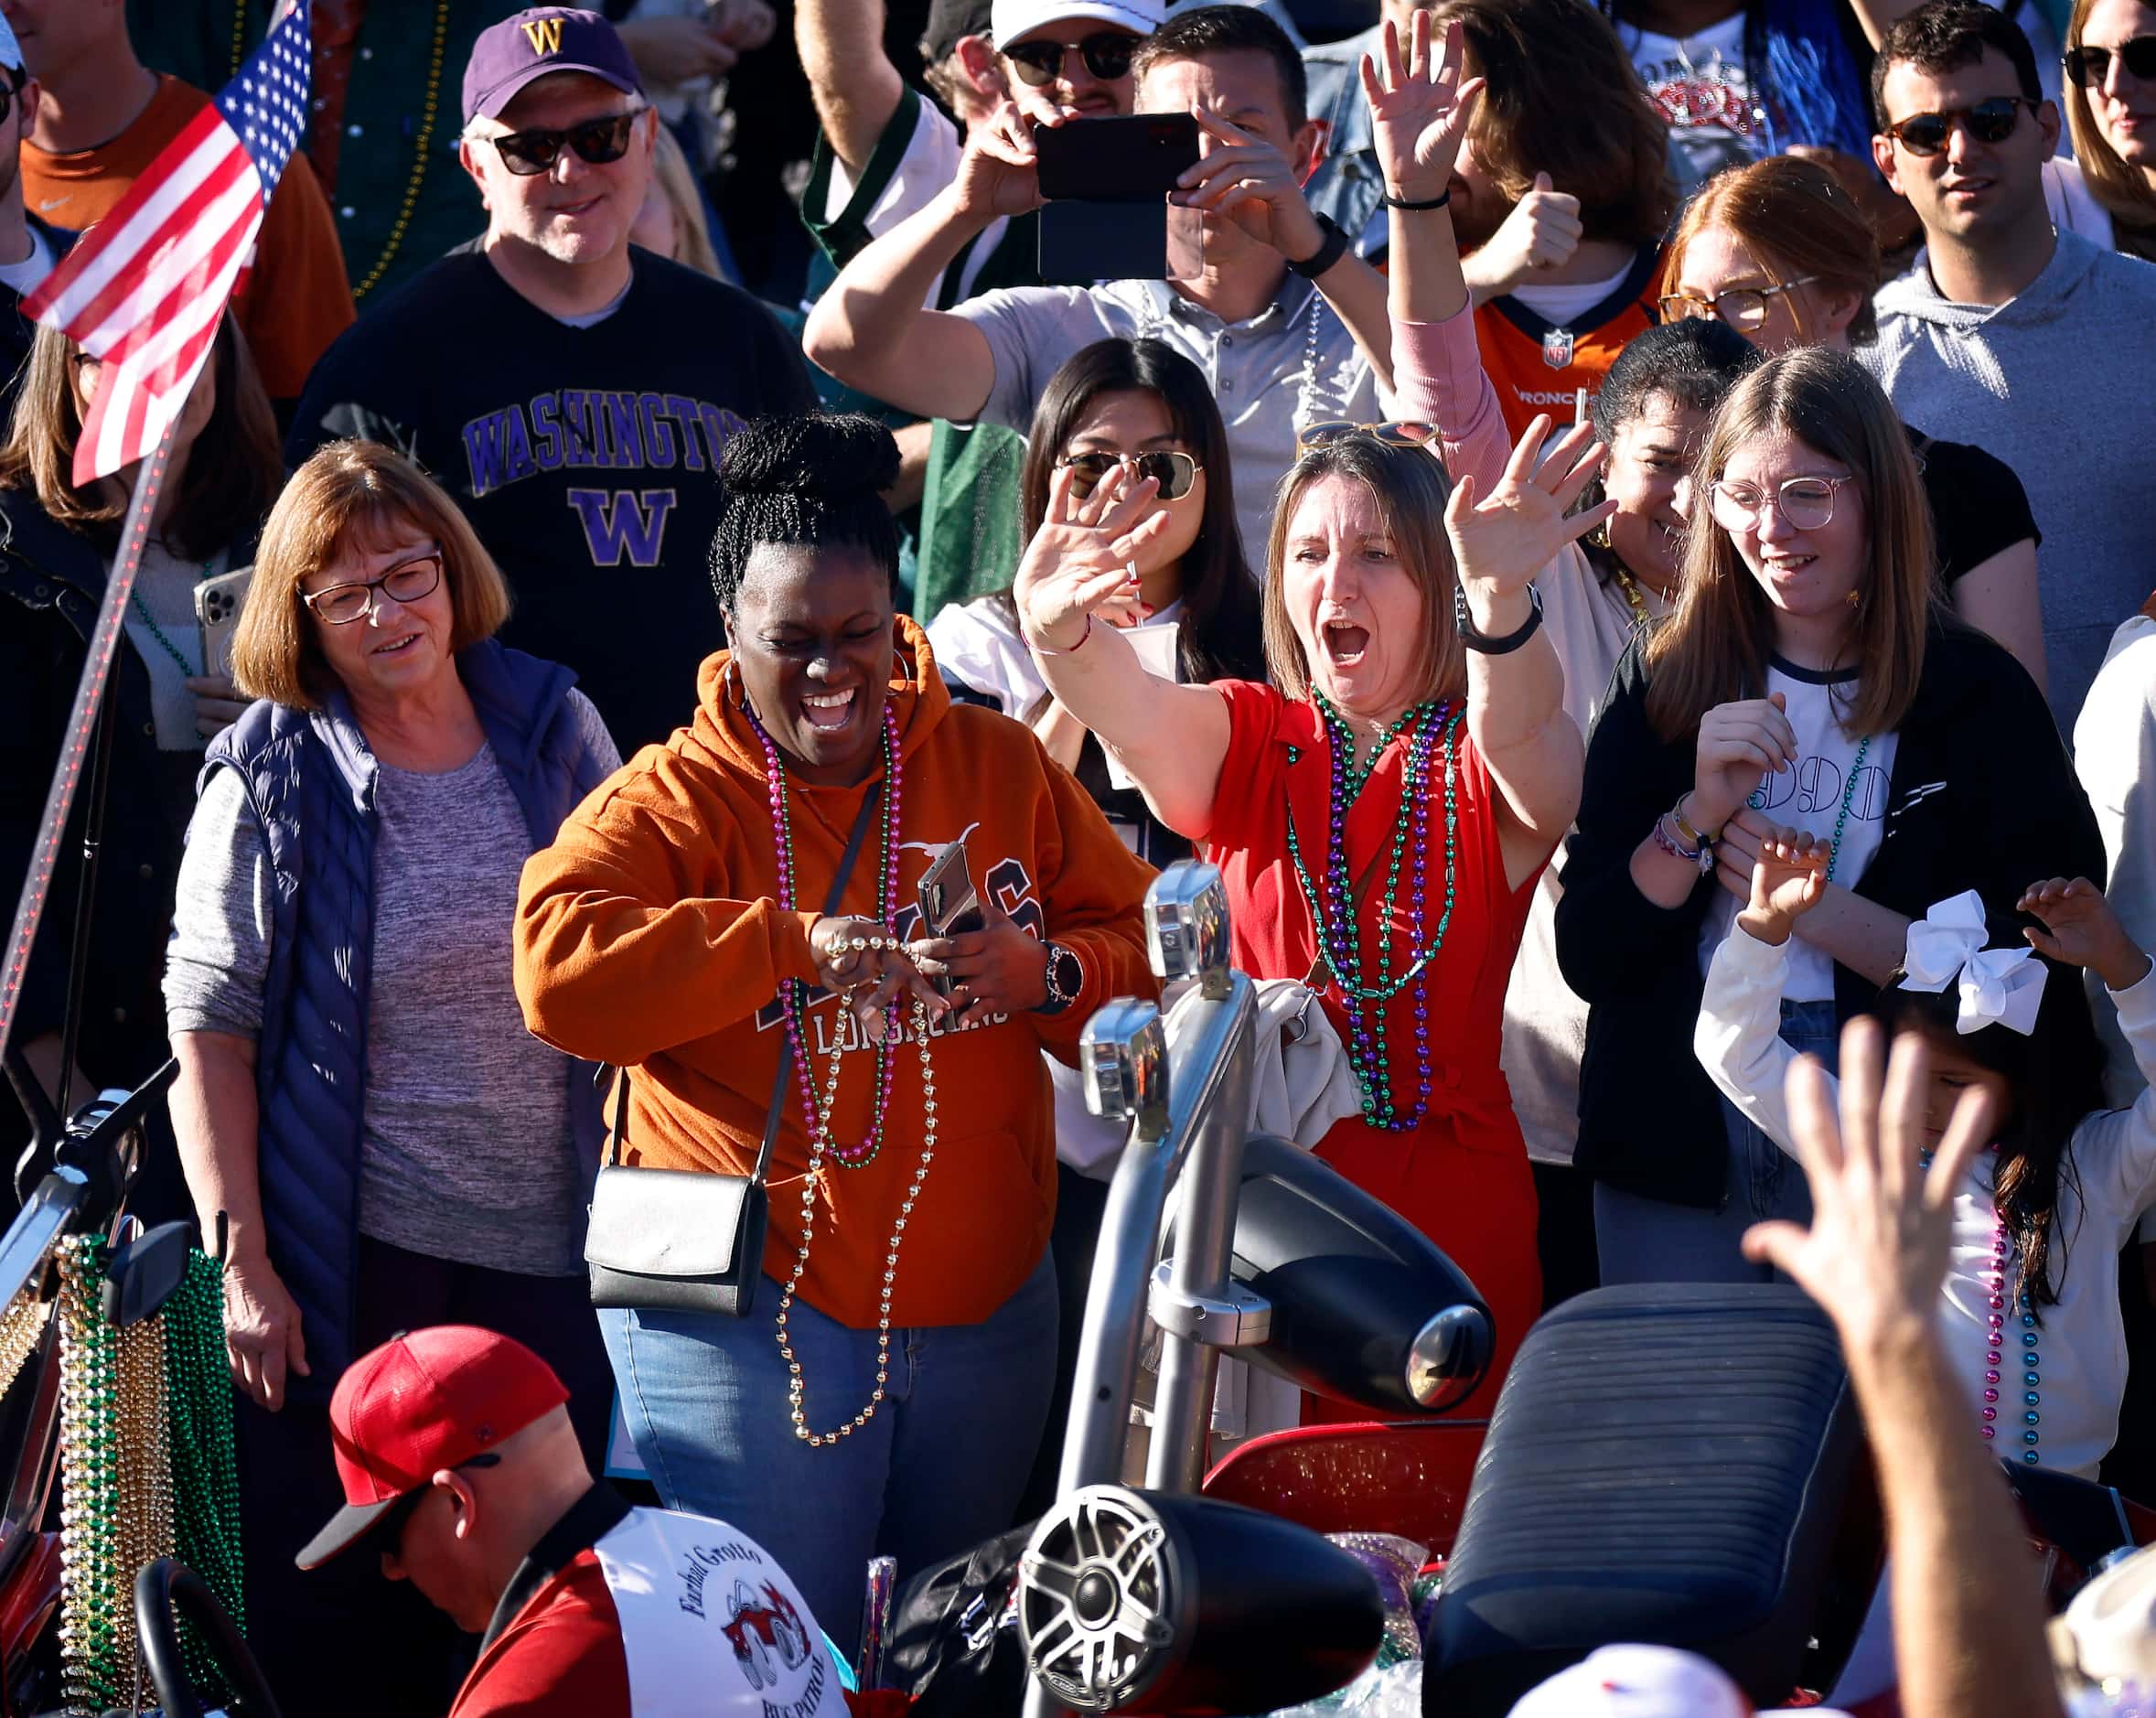 Texas Longhorns fans scream for beads during the Mardi Gras-style Allstate Sugar Bowl New...